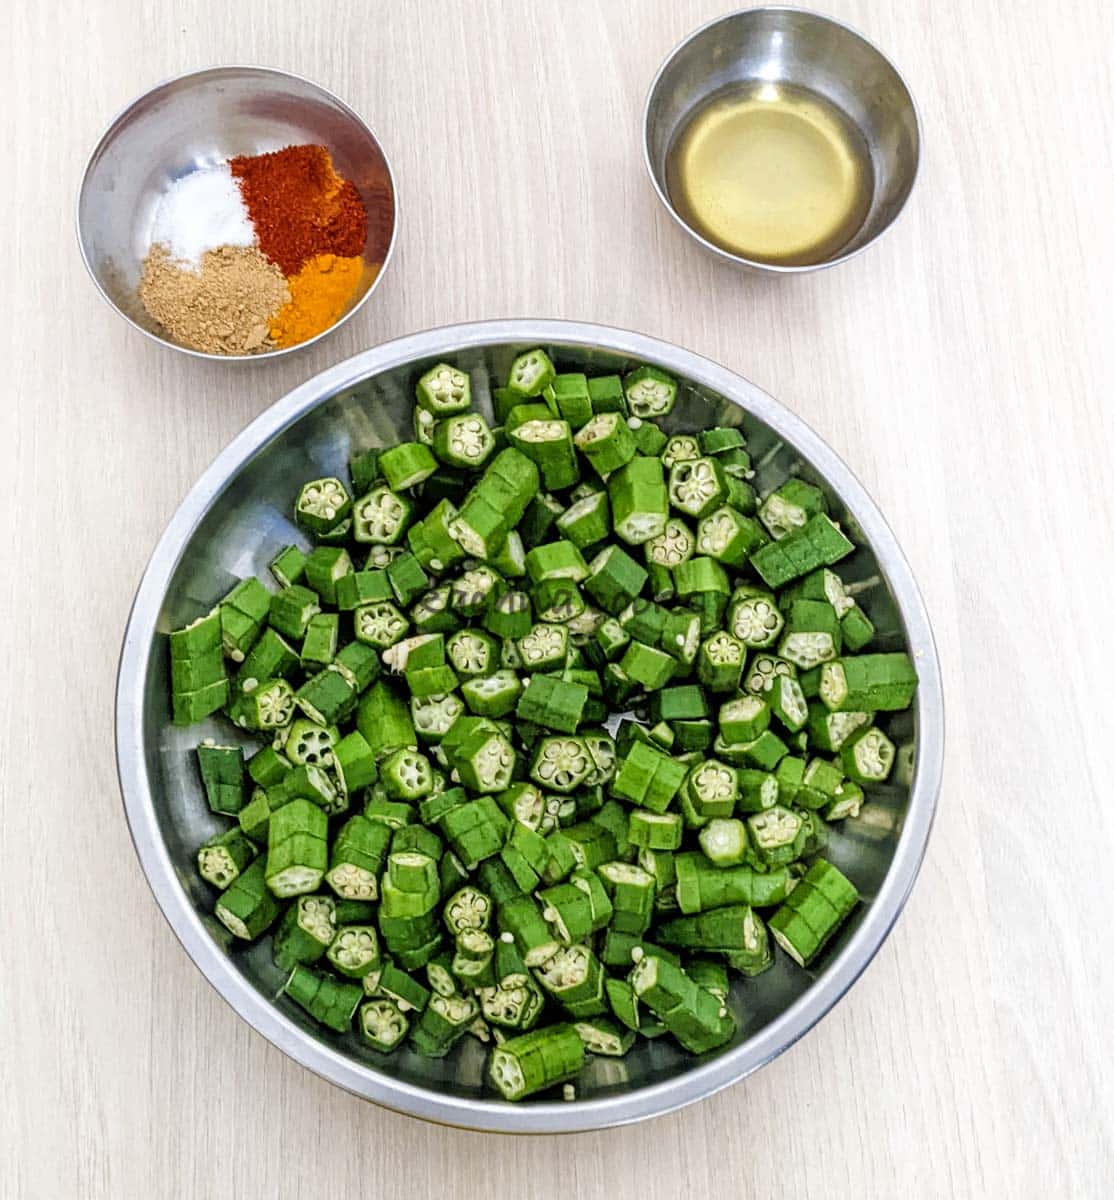 Chopped okra in a shallow plate, bowls of olive oil and spices.